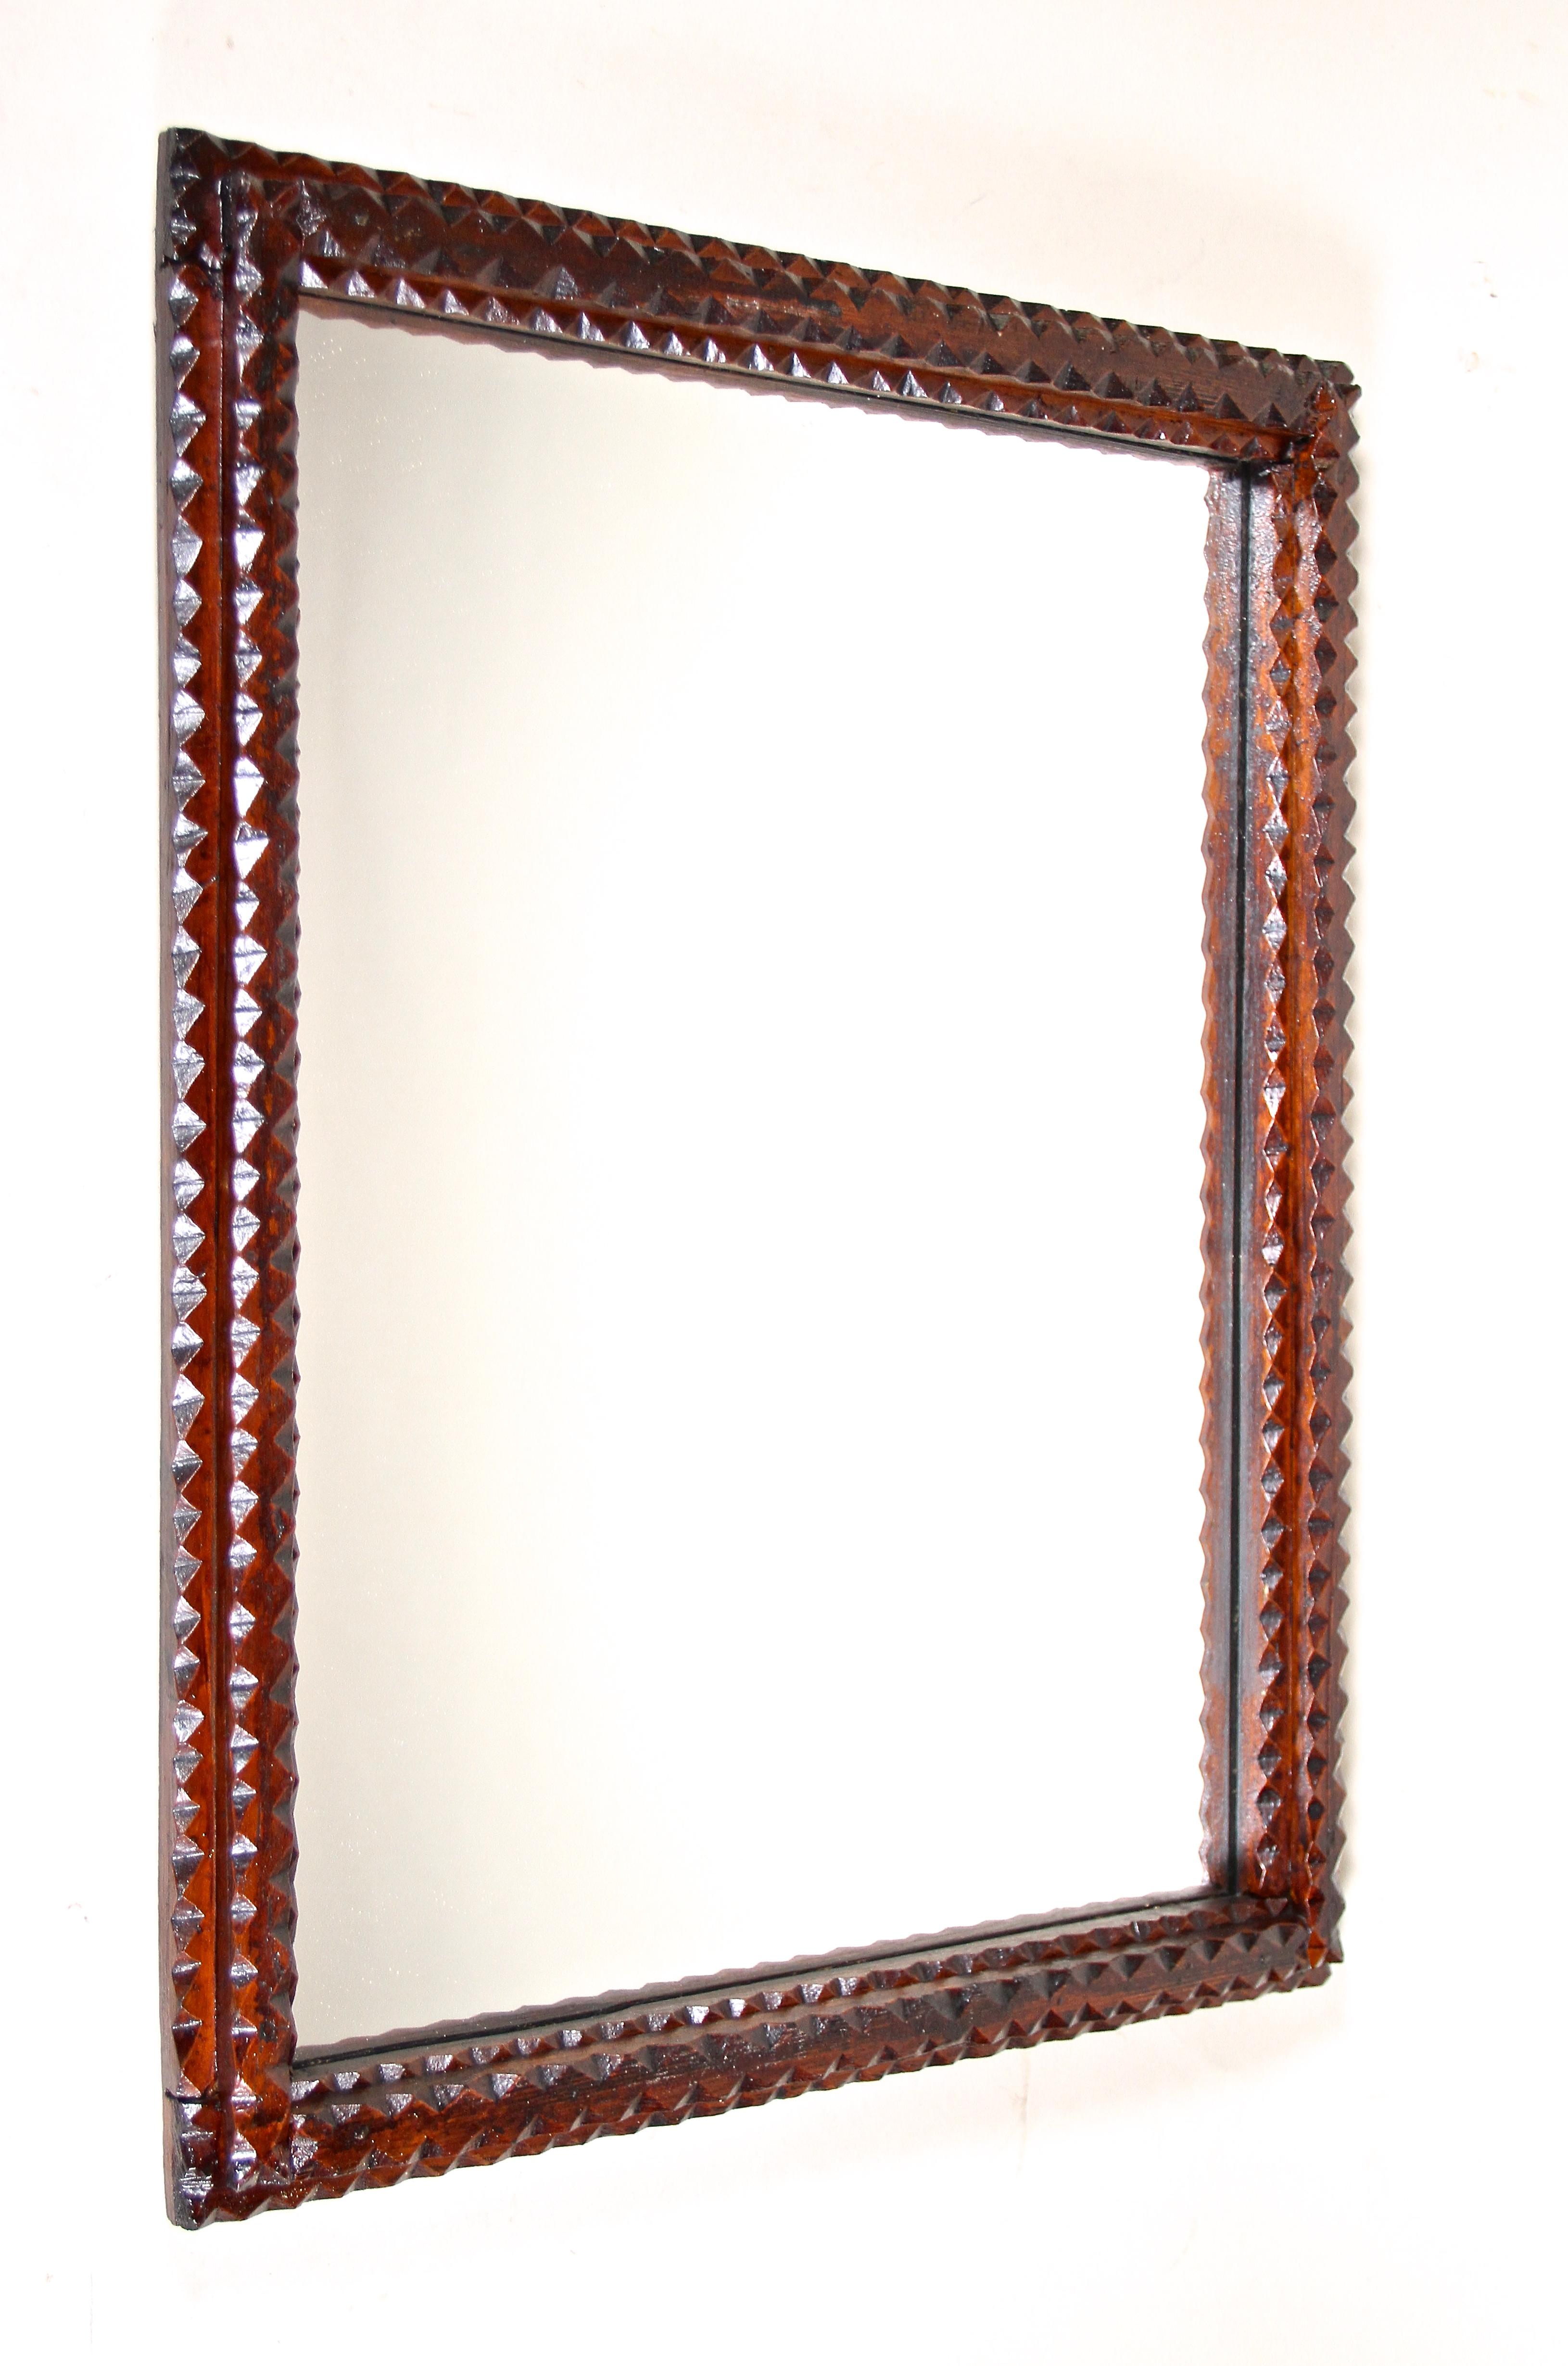 Late 19th century rustic Tramp Art mirror out of Austria from around 1880. The hand carved basswood frame shows lovely chip carvings which confers this highly demanded kind of mirror an unusual rural look. Stained in a beautiful dark brown tone this